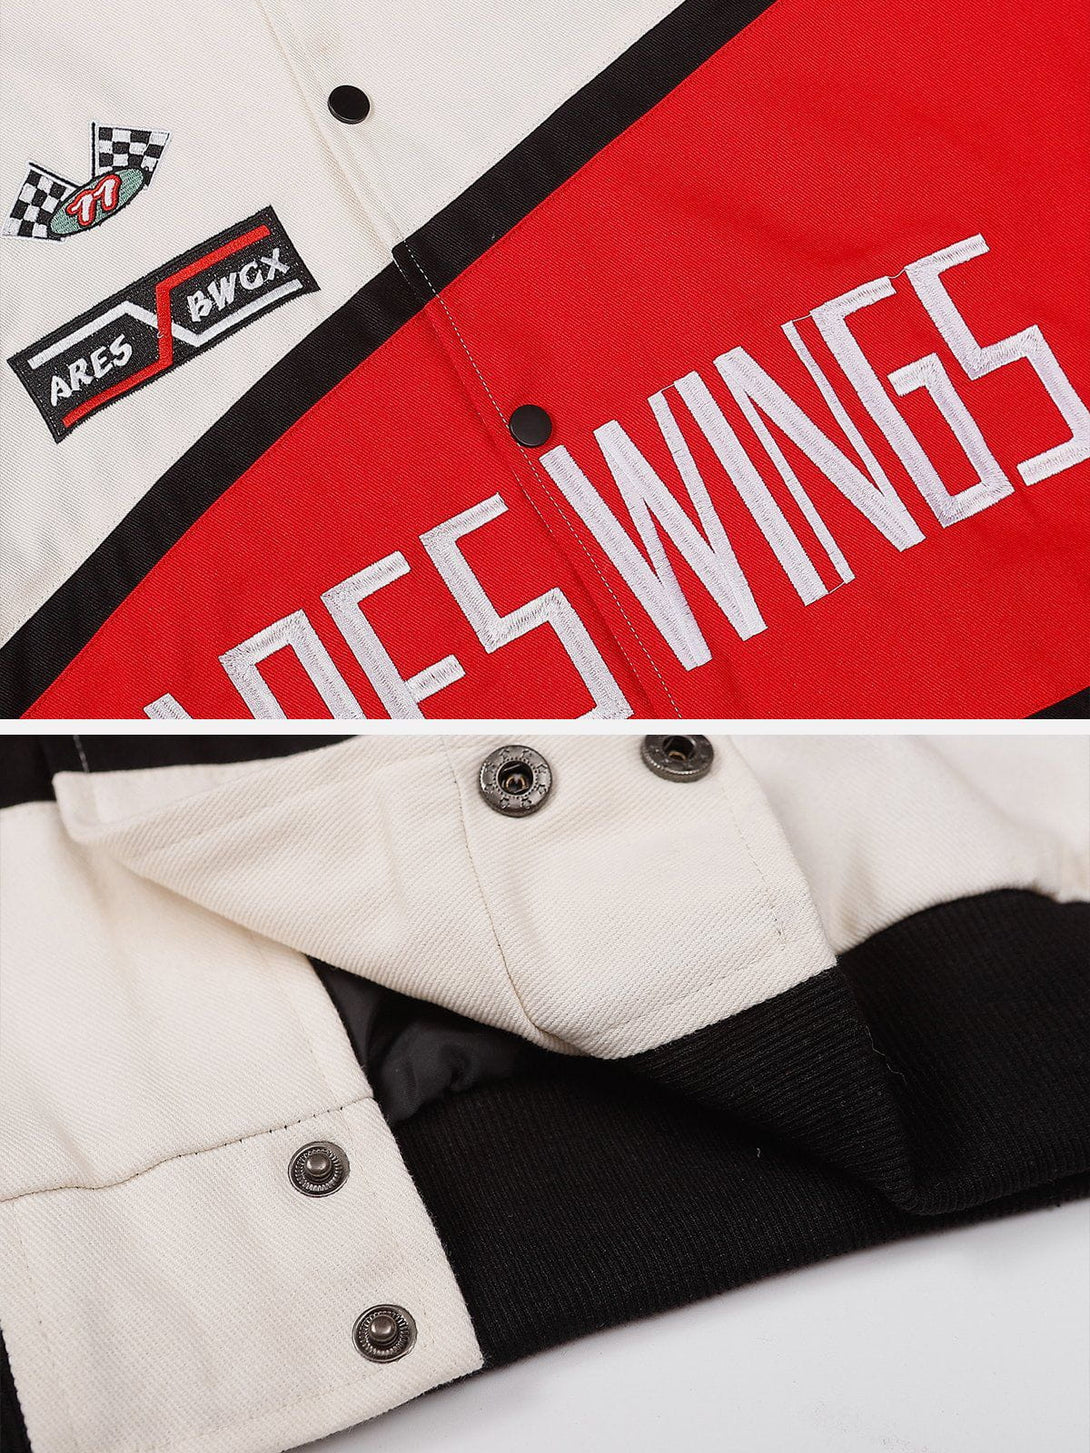 Levefly - "ARES WINGS" Patchwork Racing Jacket - Streetwear Fashion - levefly.com